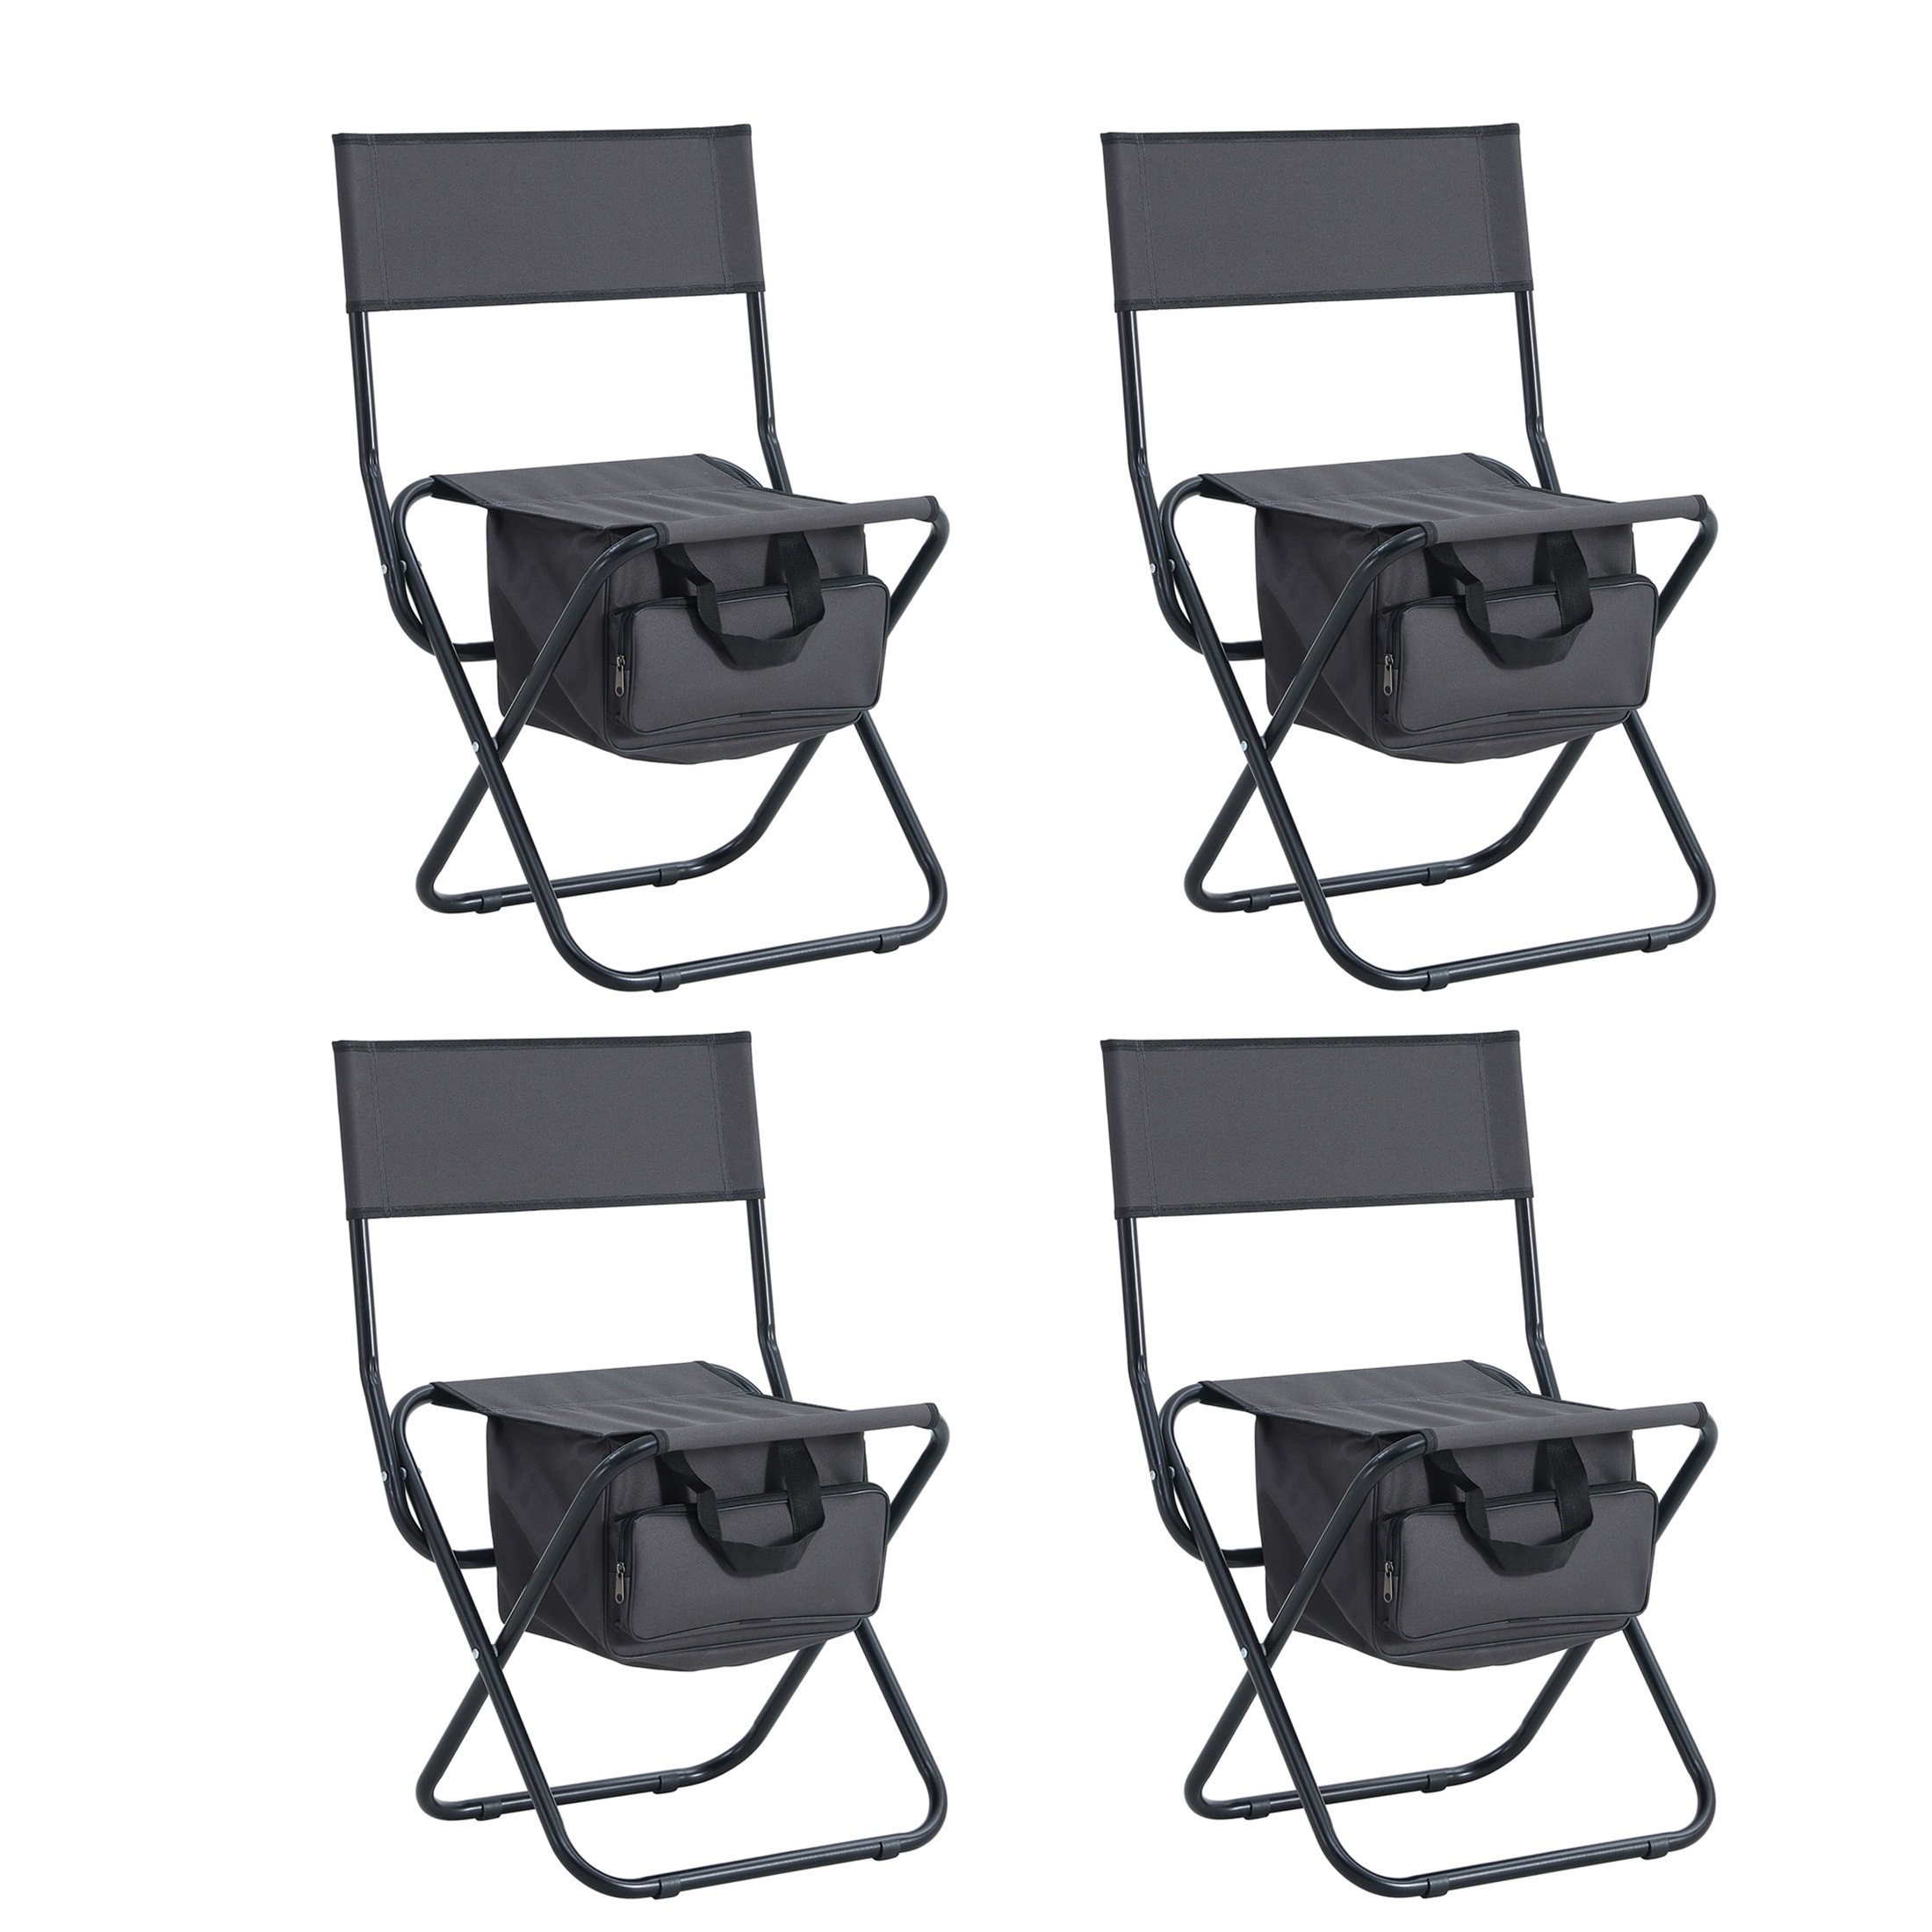 4-piece Folding Outdoor Chair With Storage Bag